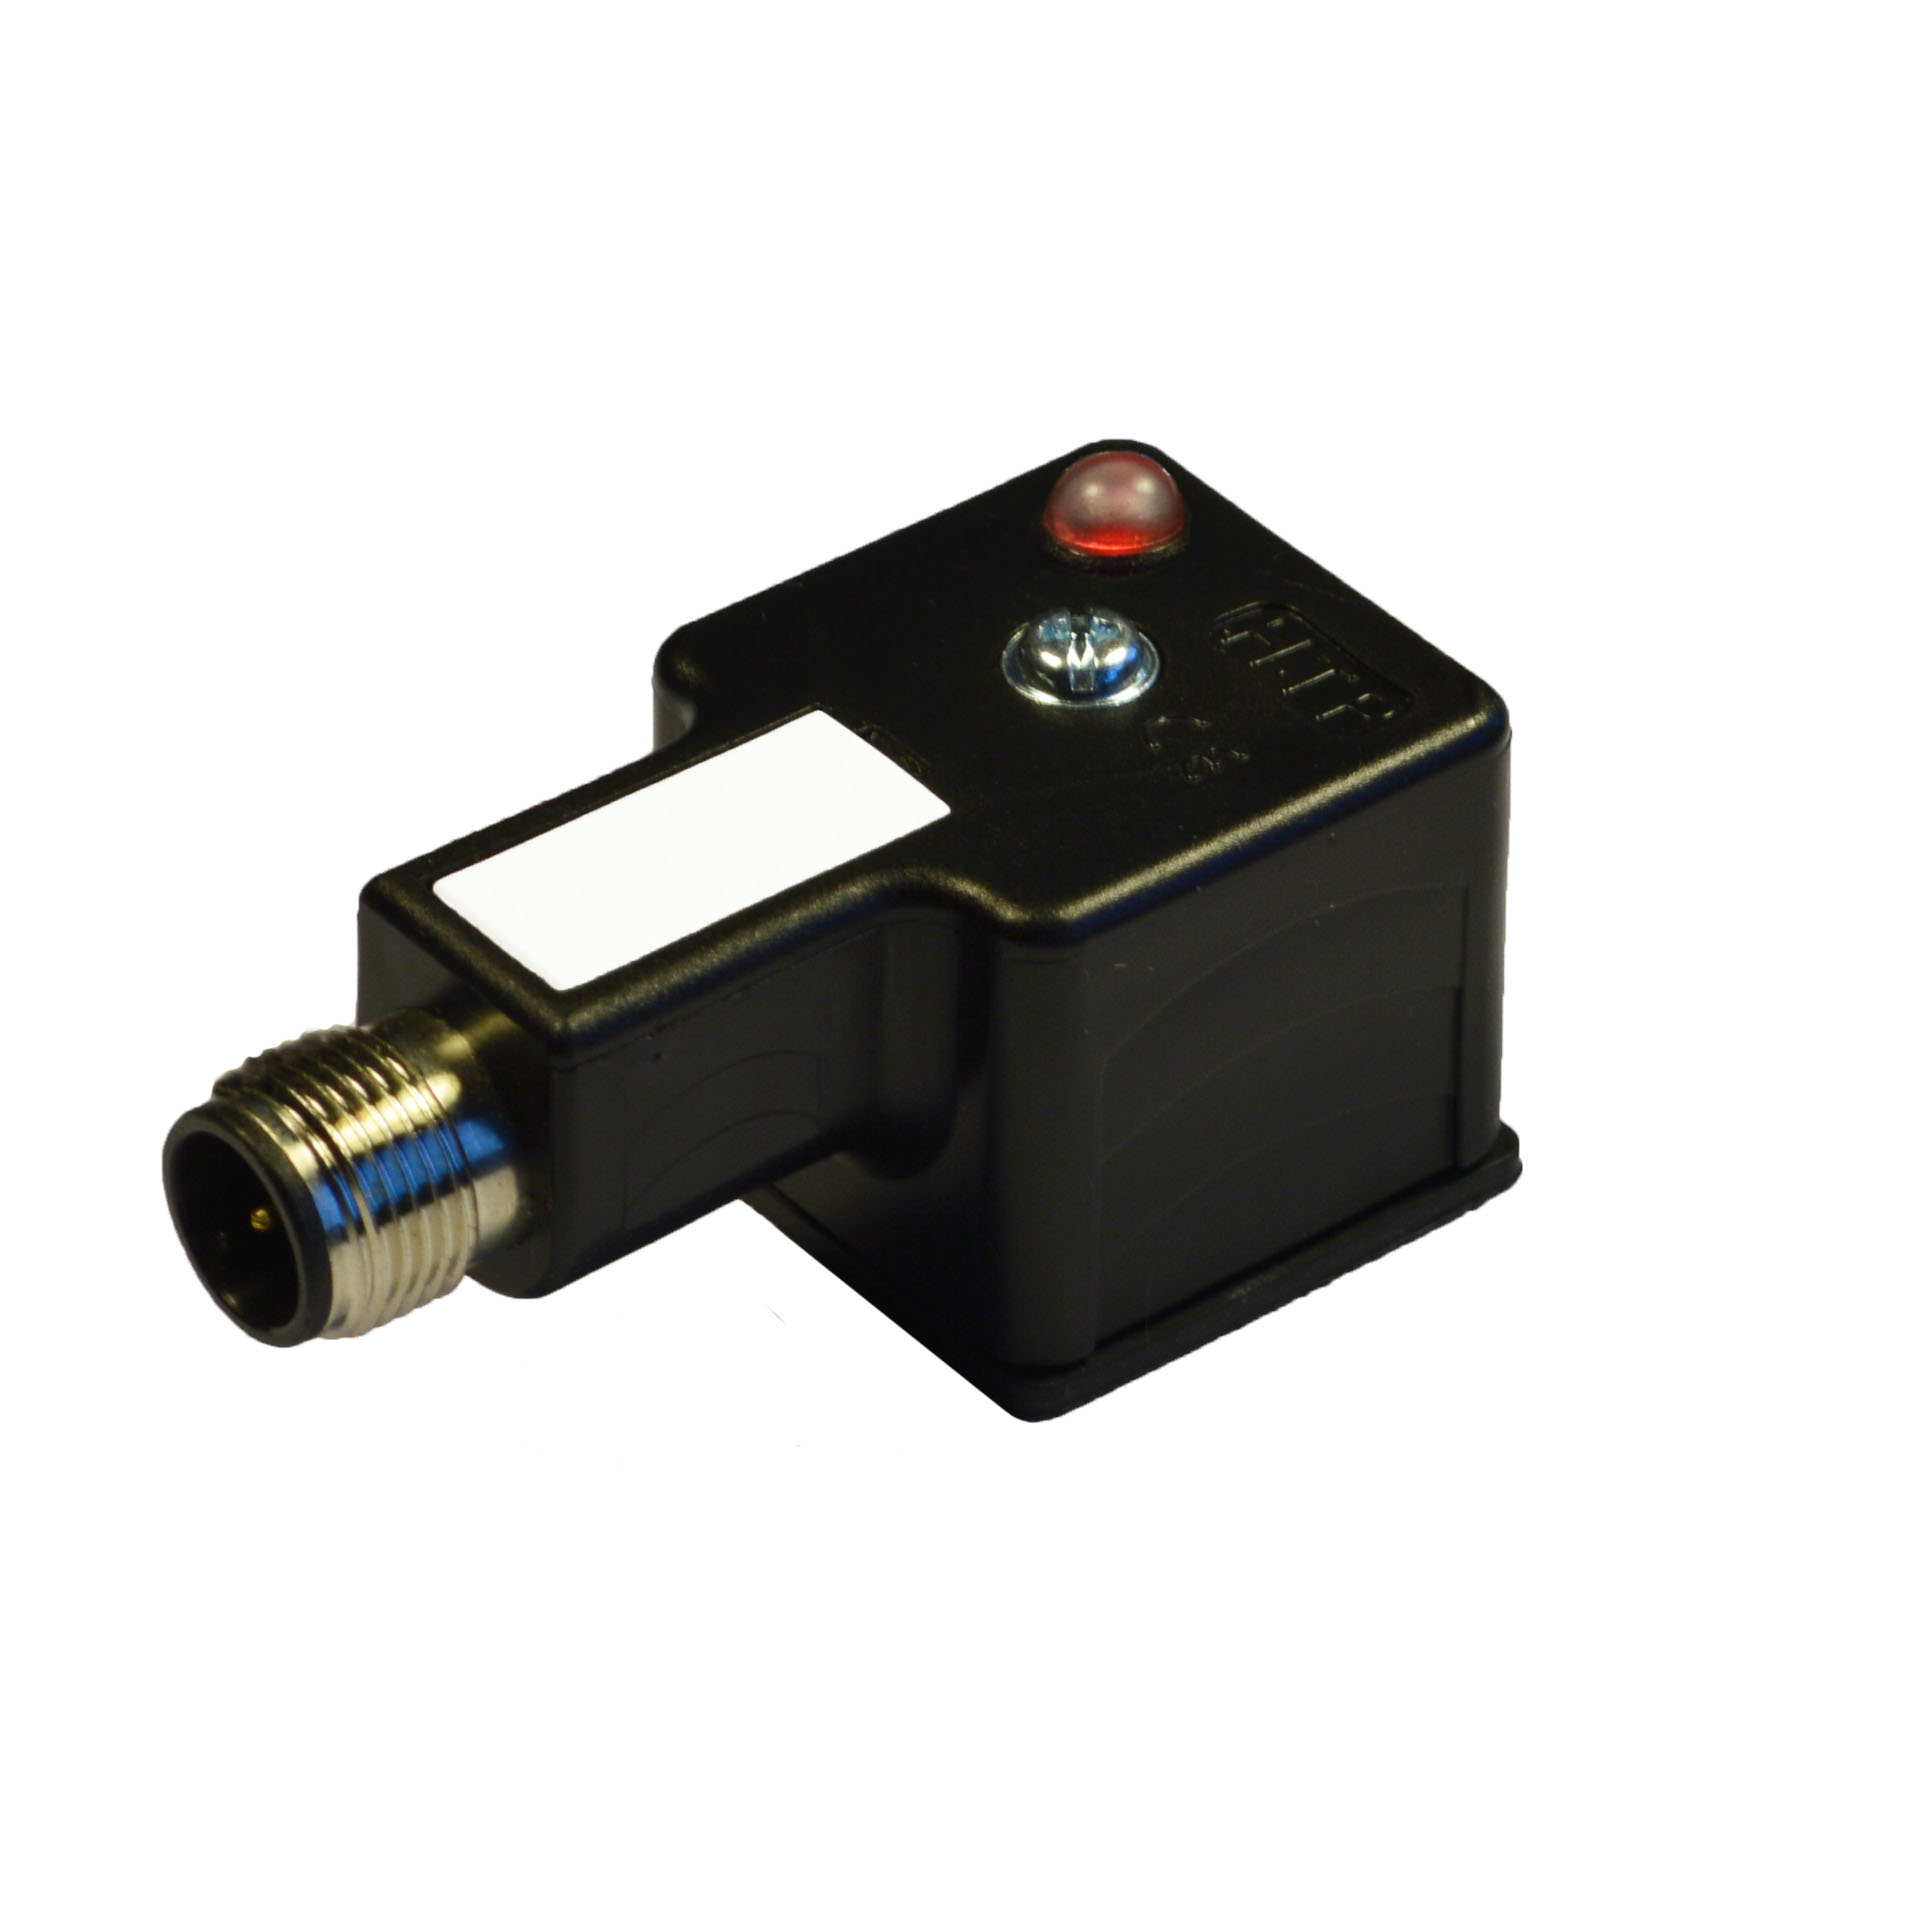 Adapter EN175301-803(type A),2p+2PE(h.6/12),red Led+diode,24VDC+M12 male,3p.